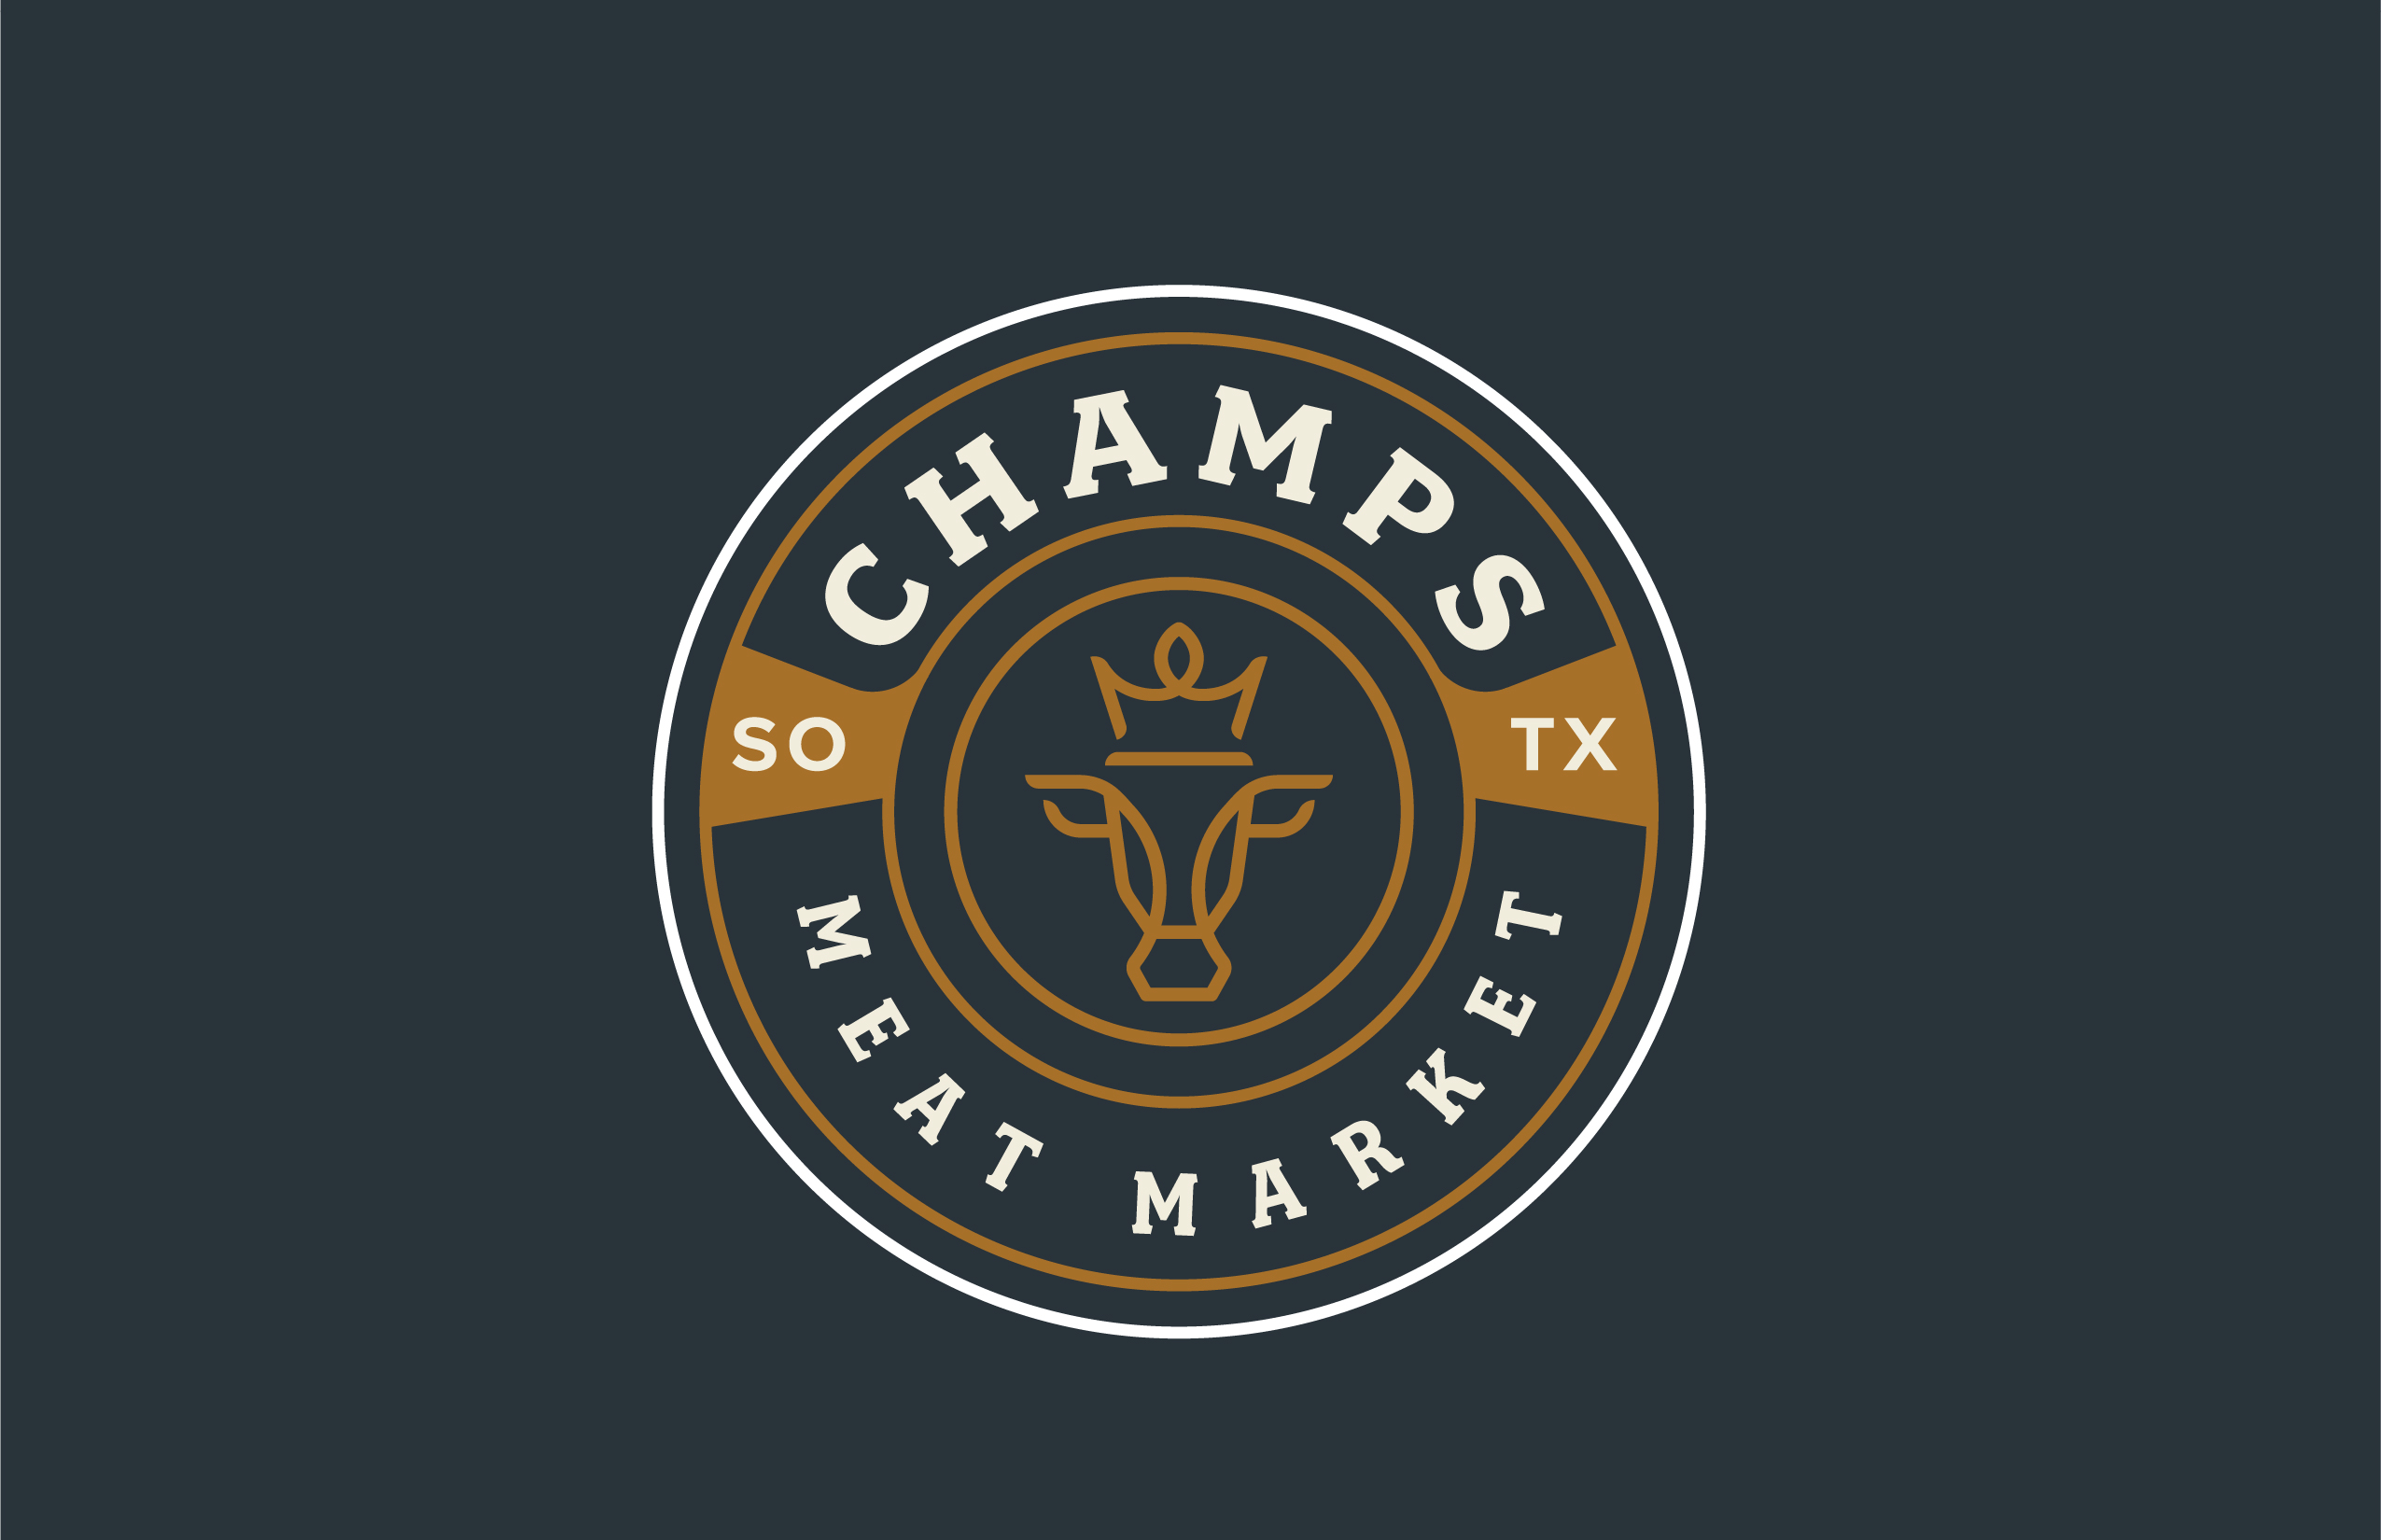 Showing the Champs Meat Market logo.